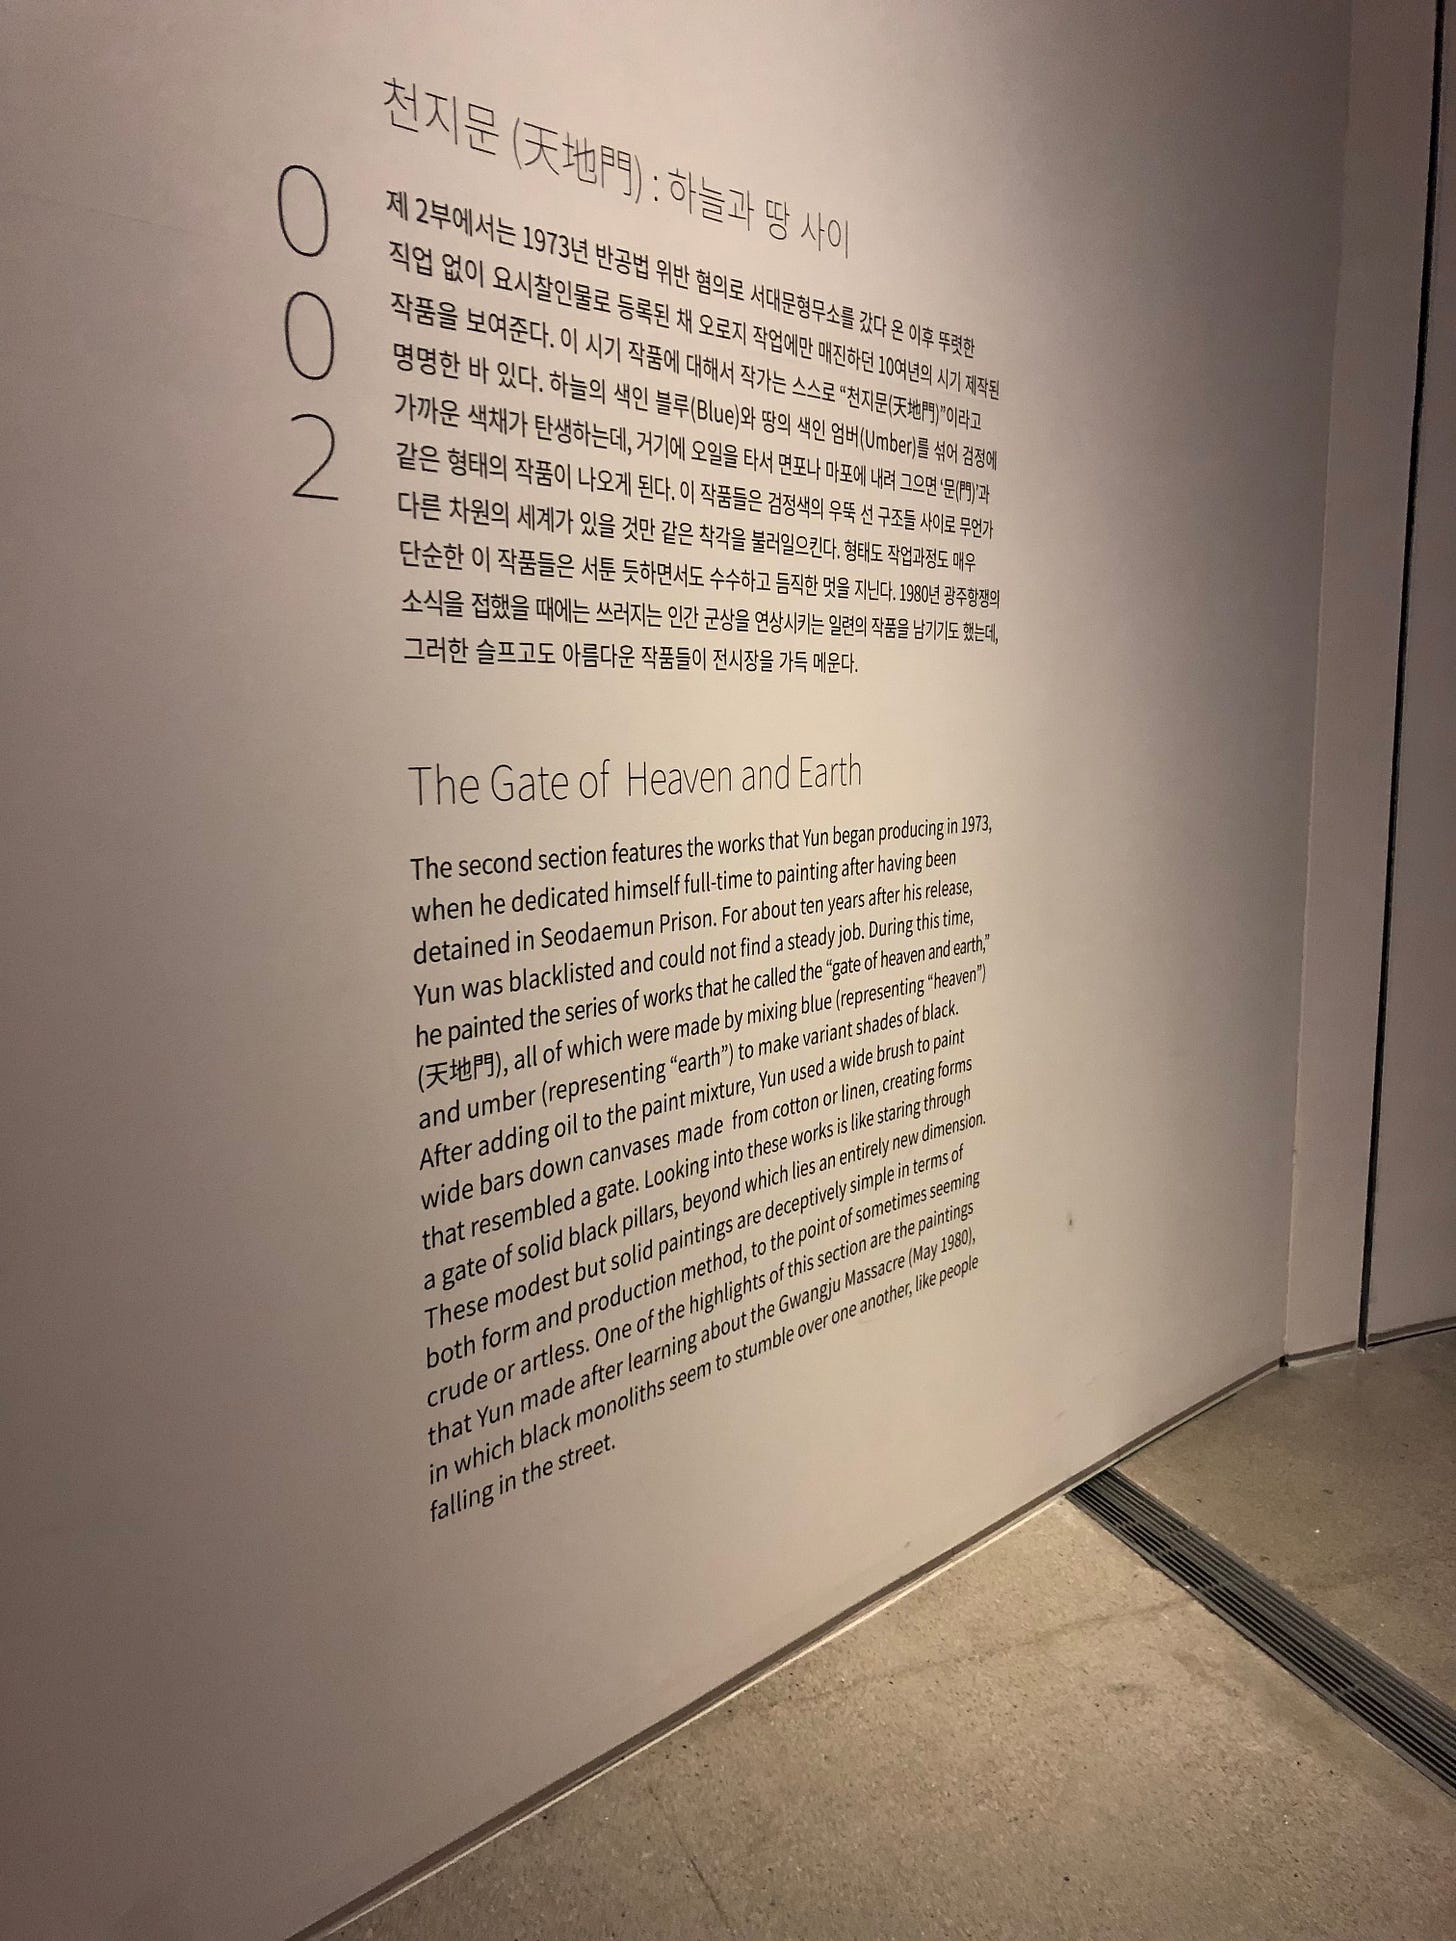 The museum description for The Gate of Heaven and Earth Series. It says, “The second section features the works that Yun began producing in 1973, when he dedicated himself full-time to painting after having been detained in Seodaemun Prison. For about ten years after his release, Yun was blacklisted and could not find a steady job. During this time, he painted the series of works that he called the "gate of heaven and earth," all of which were made by mixing blue (representing "heaven" and umber (representing "earth") to make variant shades of black. After adding oil to the paint mixture, Yun used a wide brush to paint wide bars down canvases made from cotton or linen, creating forms that resembled a gate. Looking into these works is like staring through a gate of solid black pillars, beyond which lies an entirely new dimension. These modest but solid paintings are deceptively simple in terms of both form and production method, to the point of sometimes seeming crude or artless. One of the highlights of this section are the paintings that Yun made after learning about the Gwangju Massacre (May 1980), in which black monoliths seem to stumble over one another, like people falling in the street.